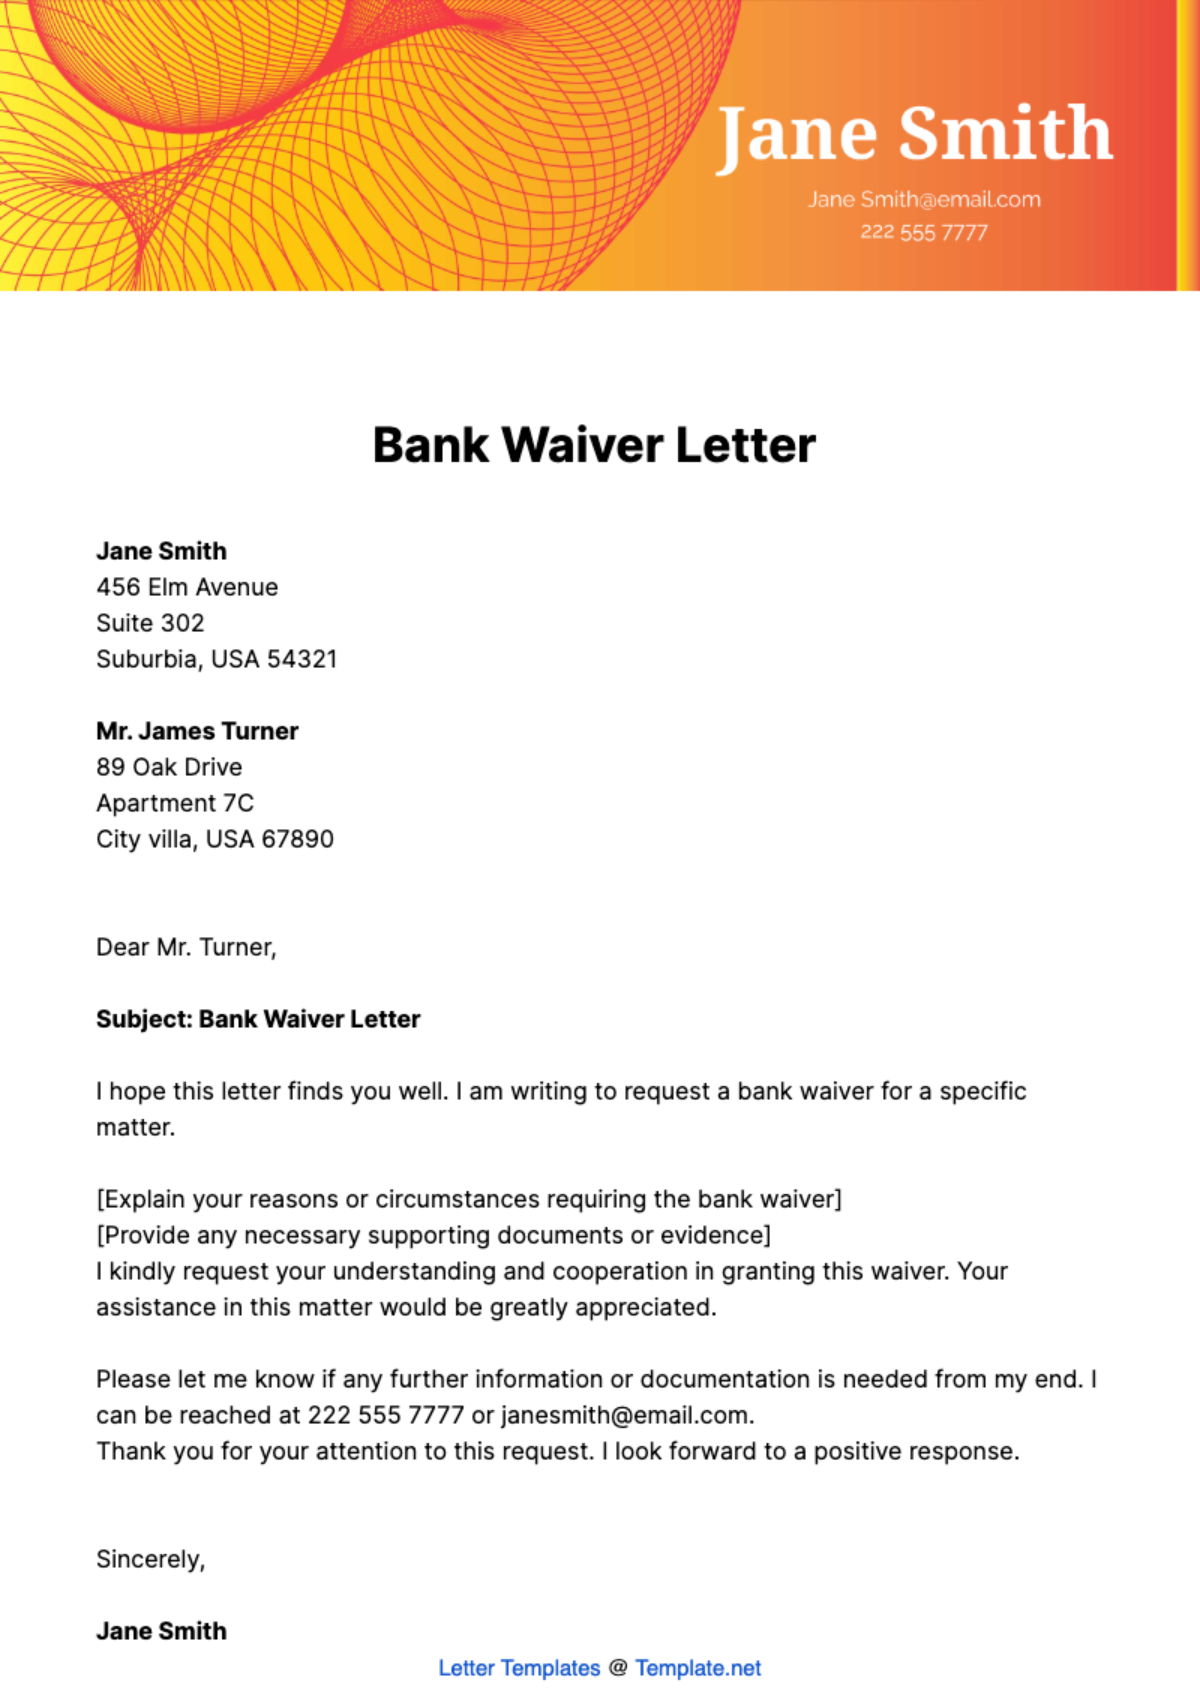 Bank Waiver Letter Template